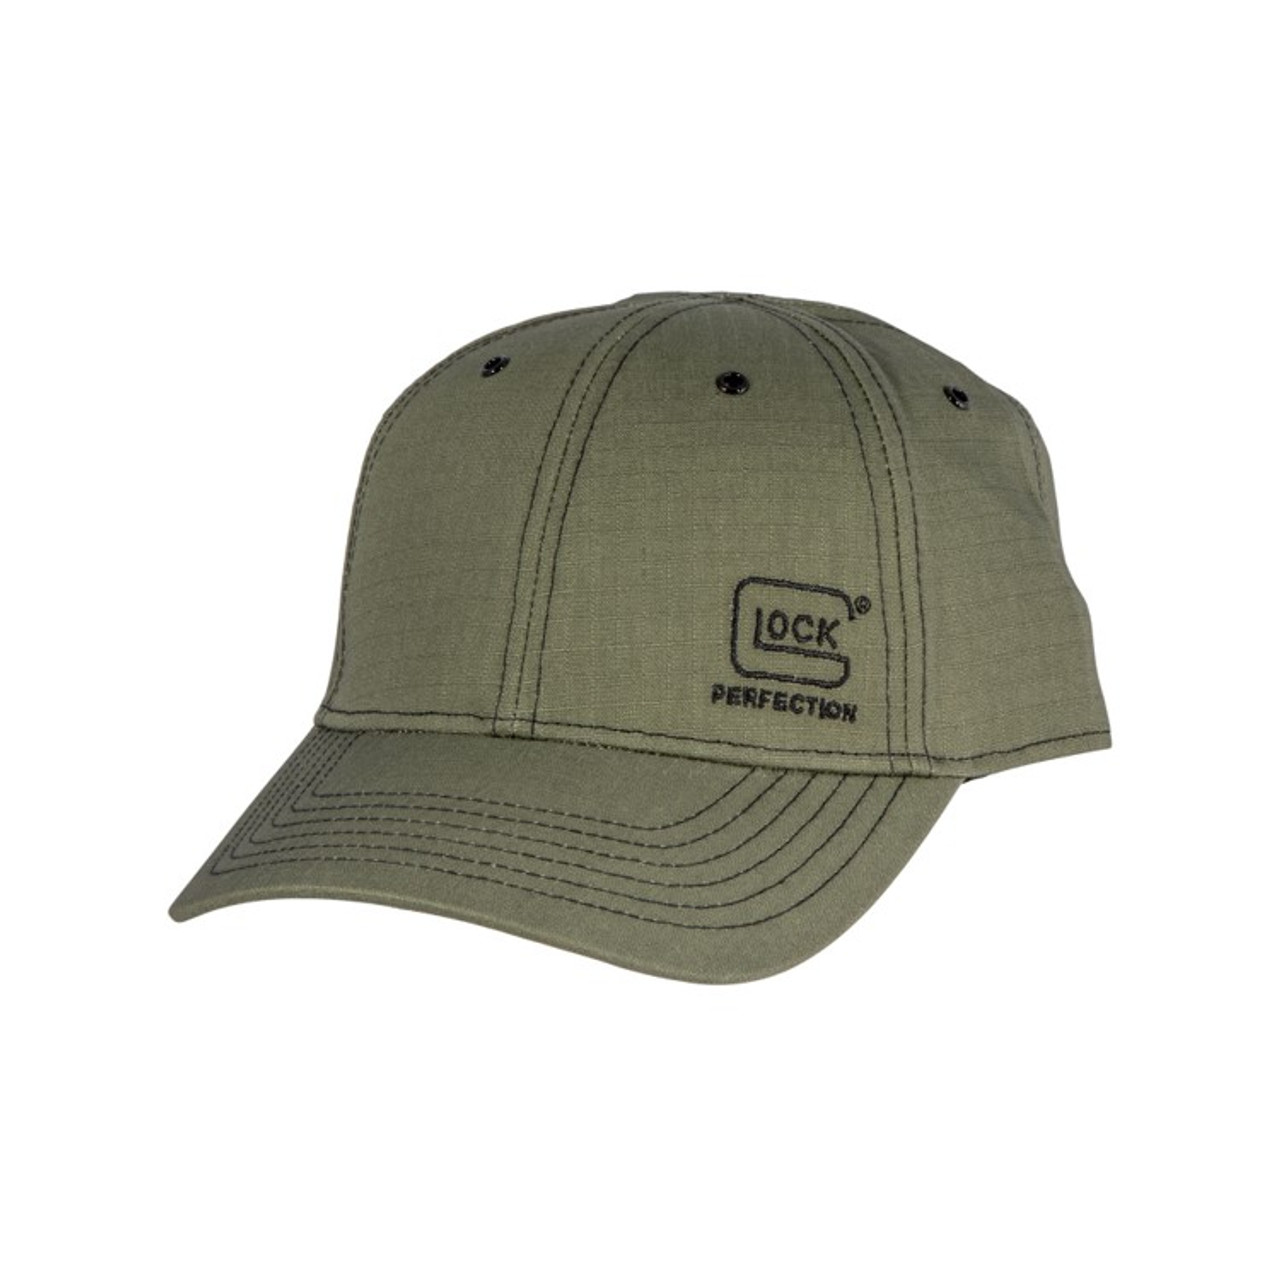 Glock Ripstock Green Hat | For Sale - Buy it Now at Charlie's Custom Clones